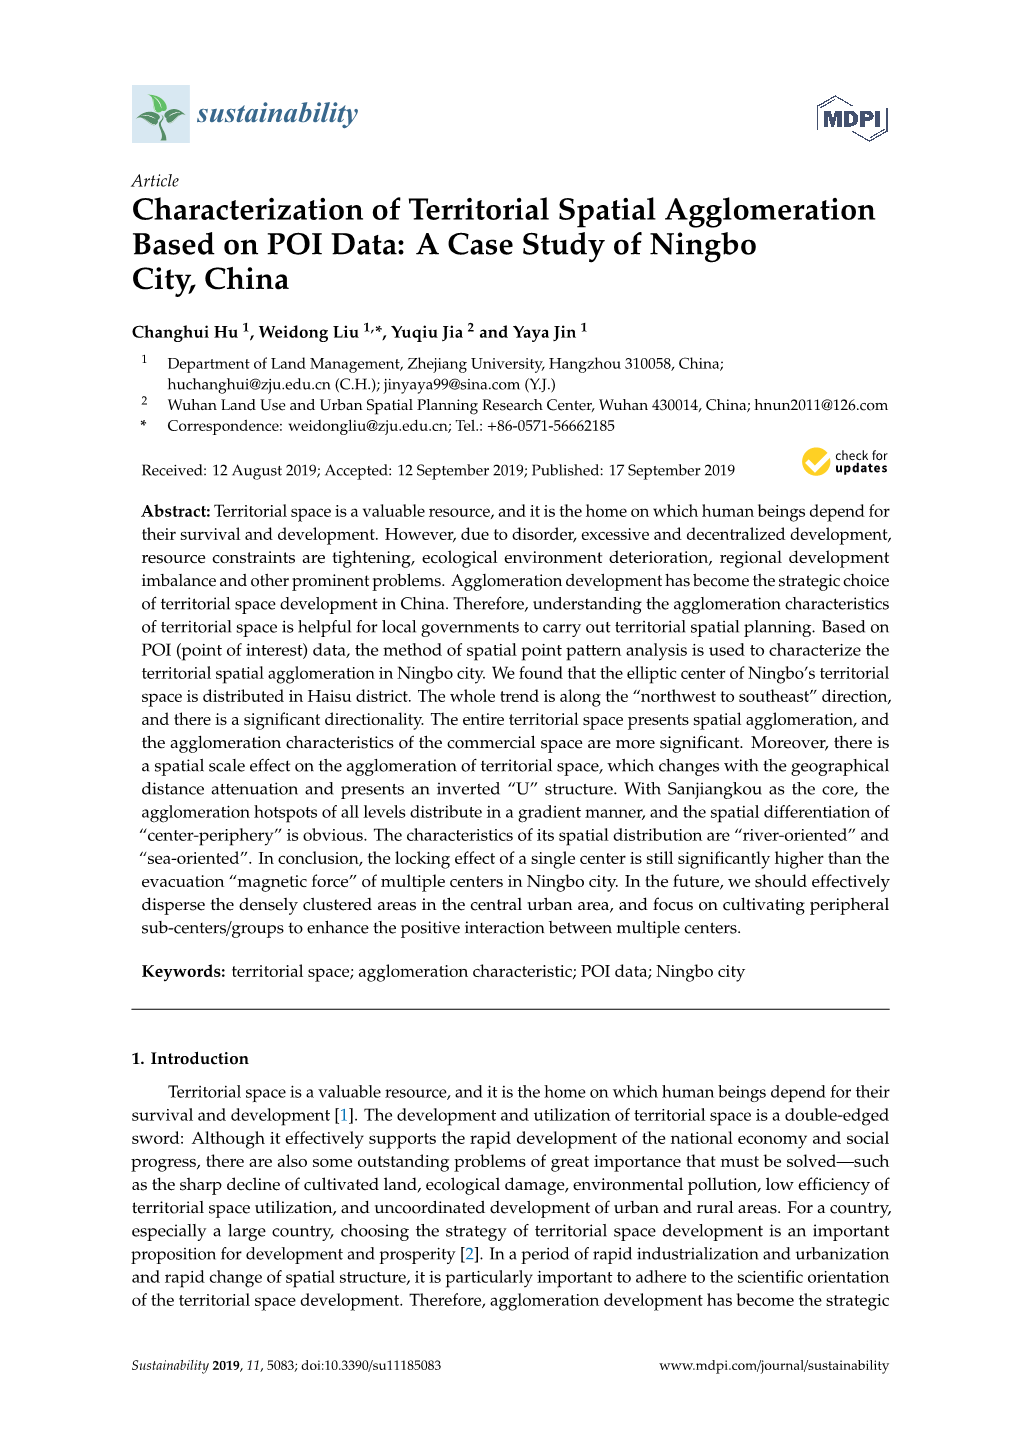 Characterization of Territorial Spatial Agglomeration Based on POI Data: a Case Study of Ningbo City, China